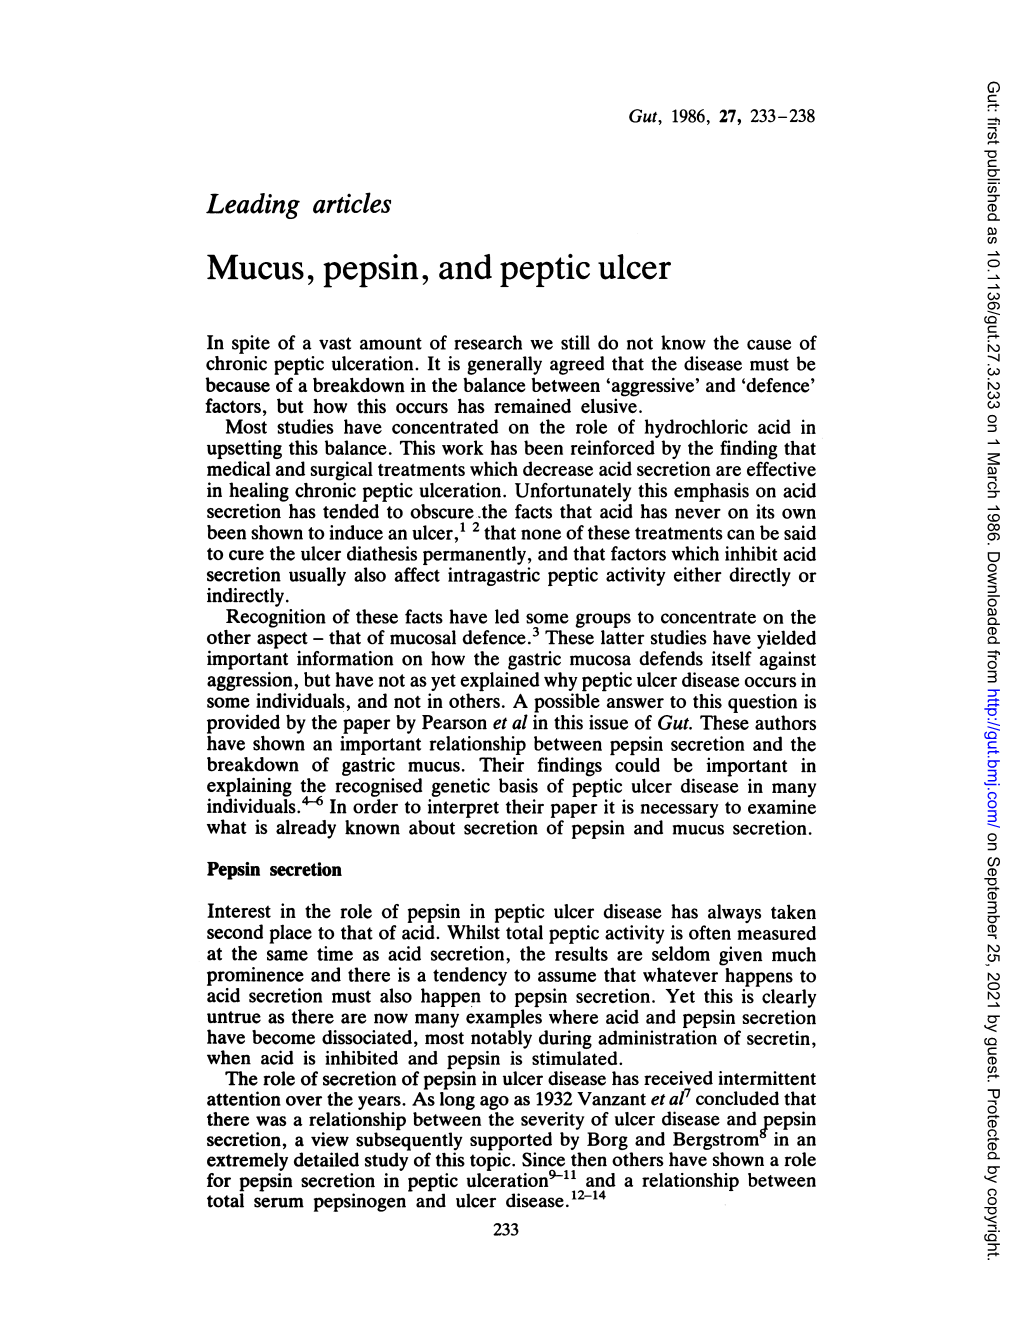 Mucus, Pepsin, and Peptic Ulcer